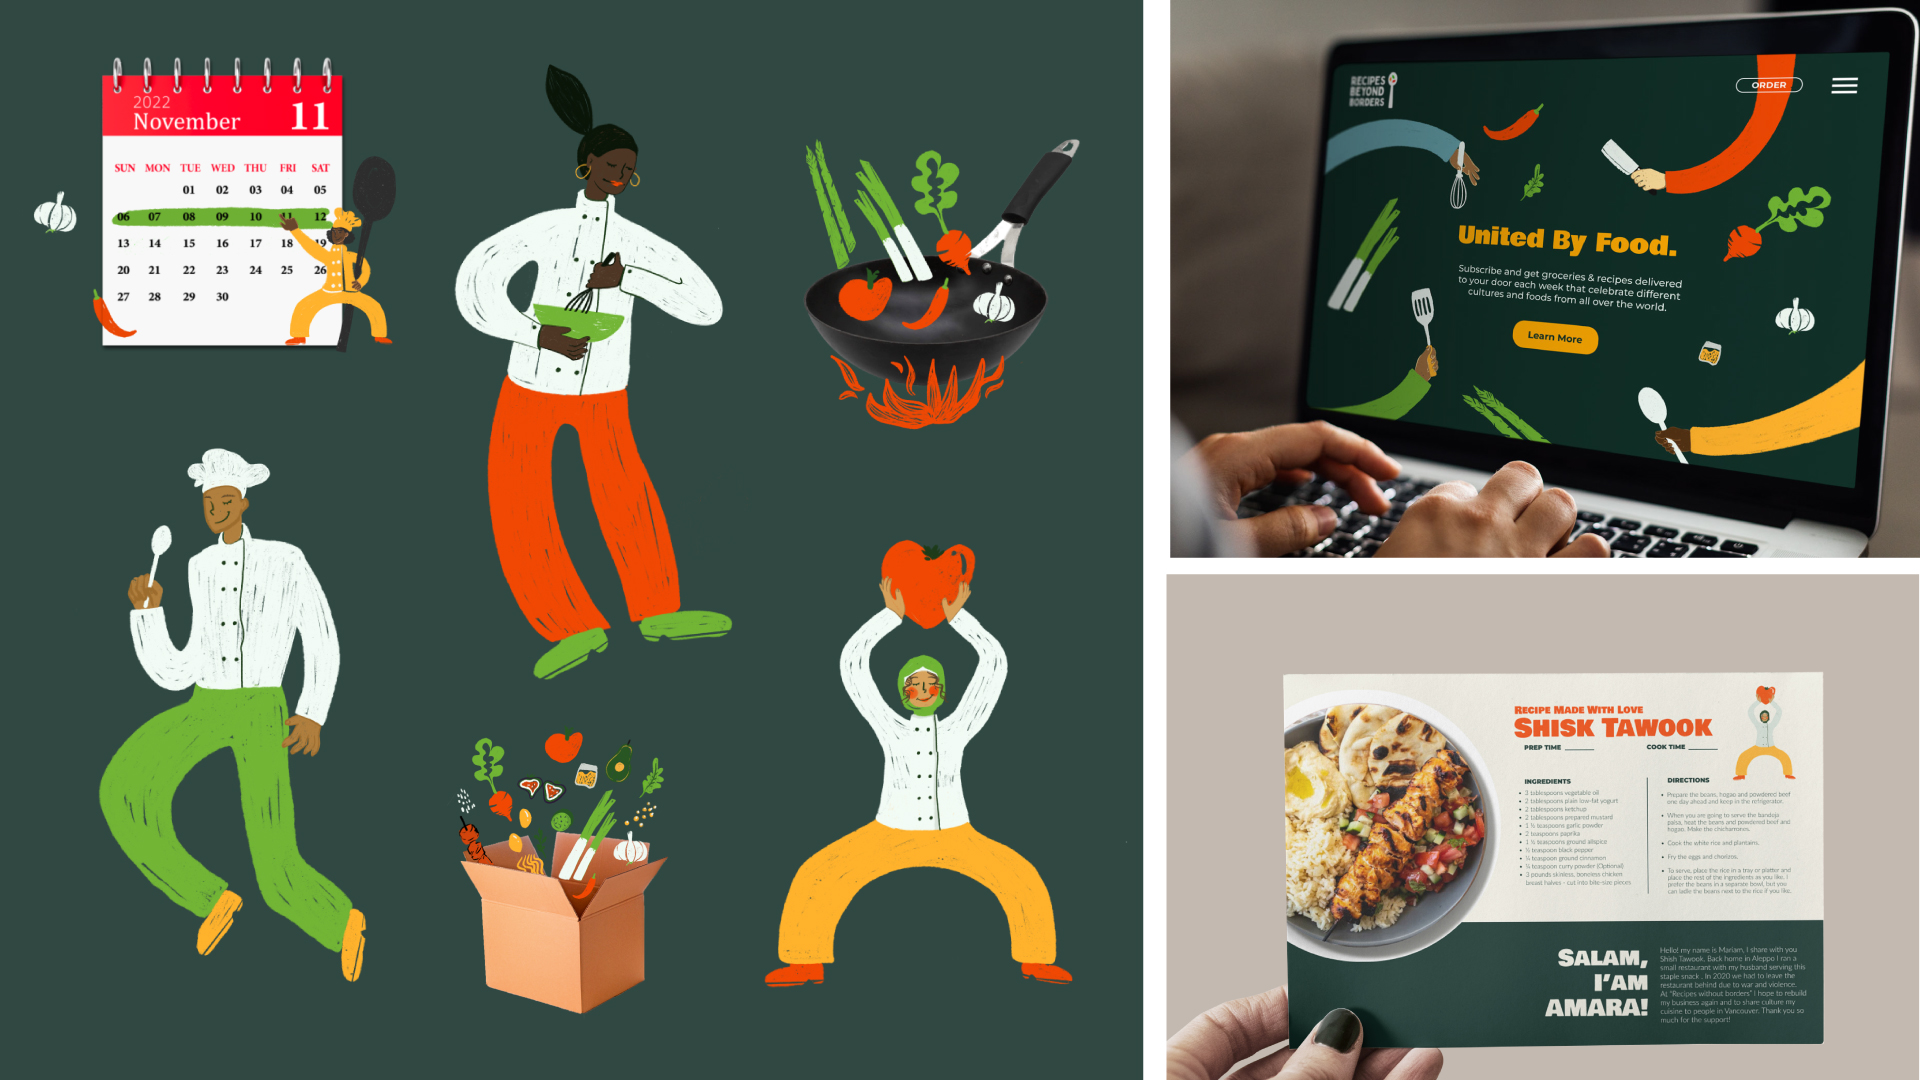 Green background with six illustrations of different chefs and cooking items. On the other side is a website landing page and a recipe card.